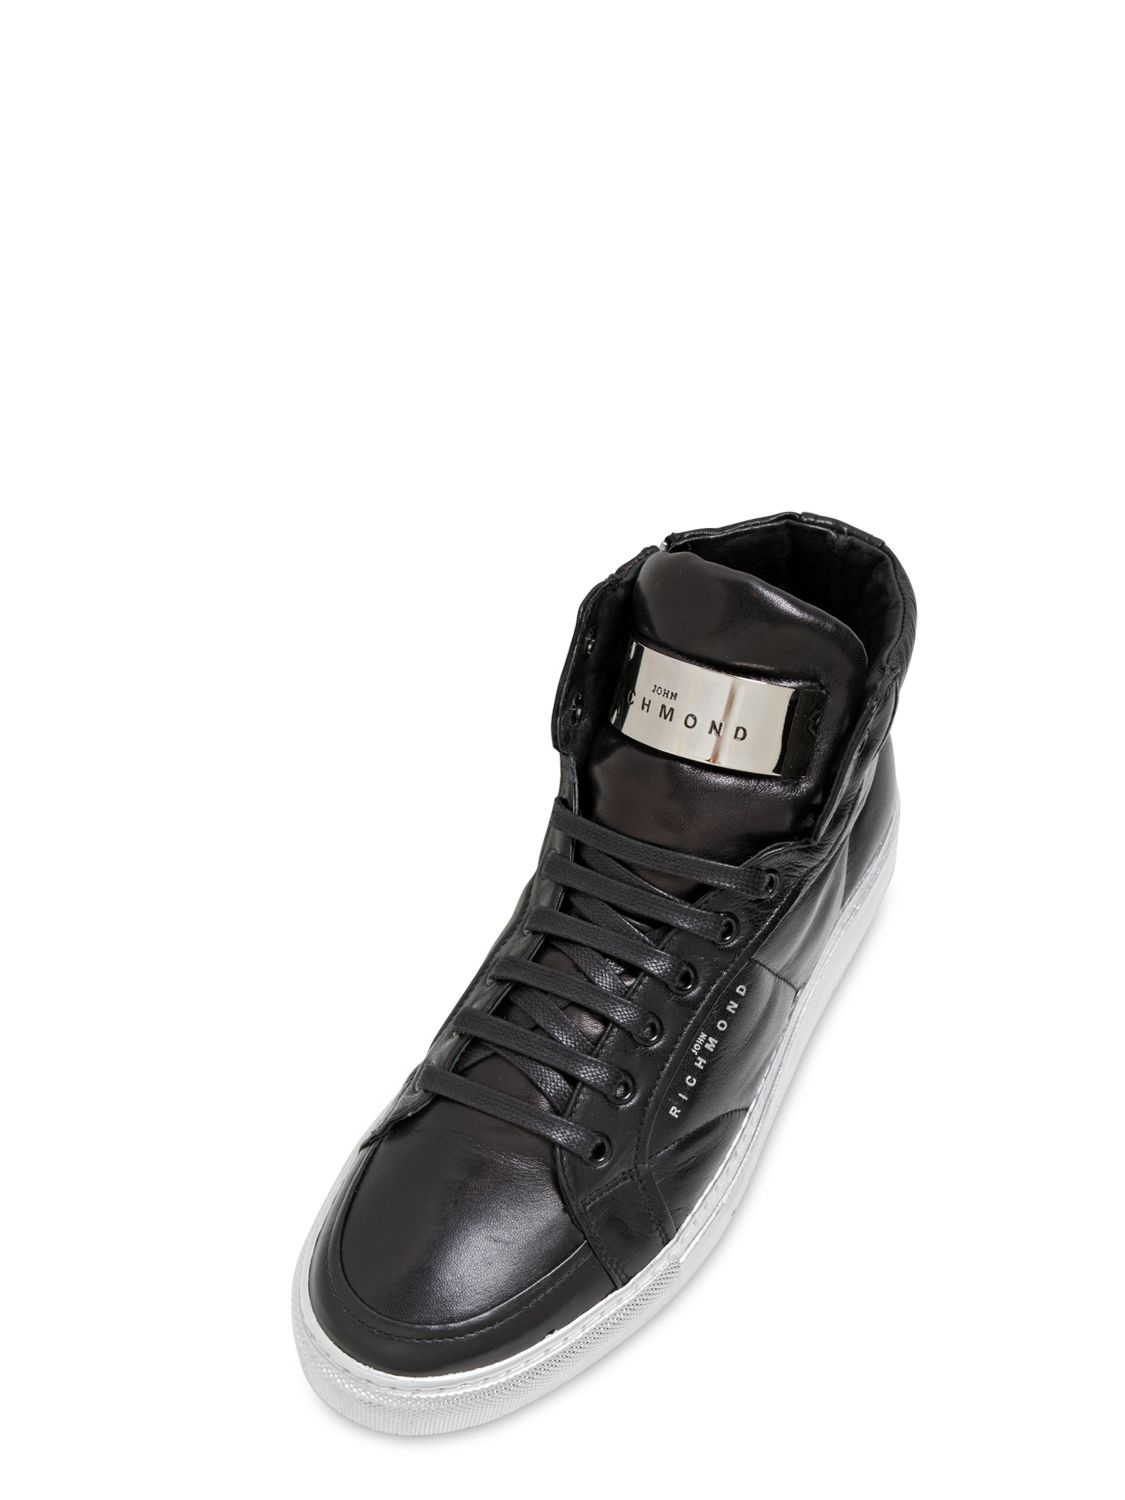 John Richmond Nappa Leather High Top Sneakers in Black for Men - Lyst